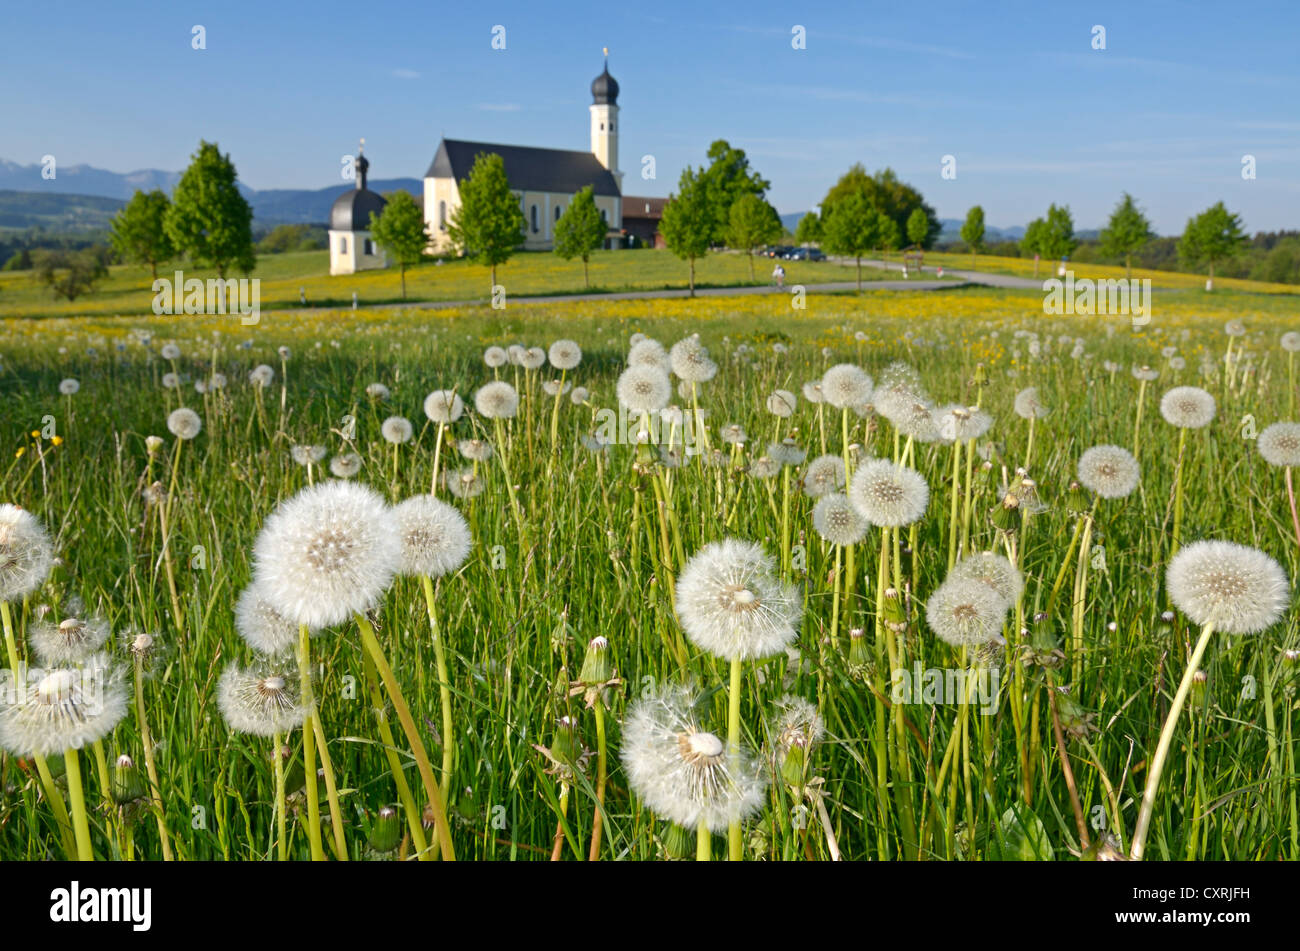 Young woman on a racing bicycle, Wilparting pilgrimage church, Irschenberg, Upper Bavaria, Bavaria, Germany, Europe Stock Photo